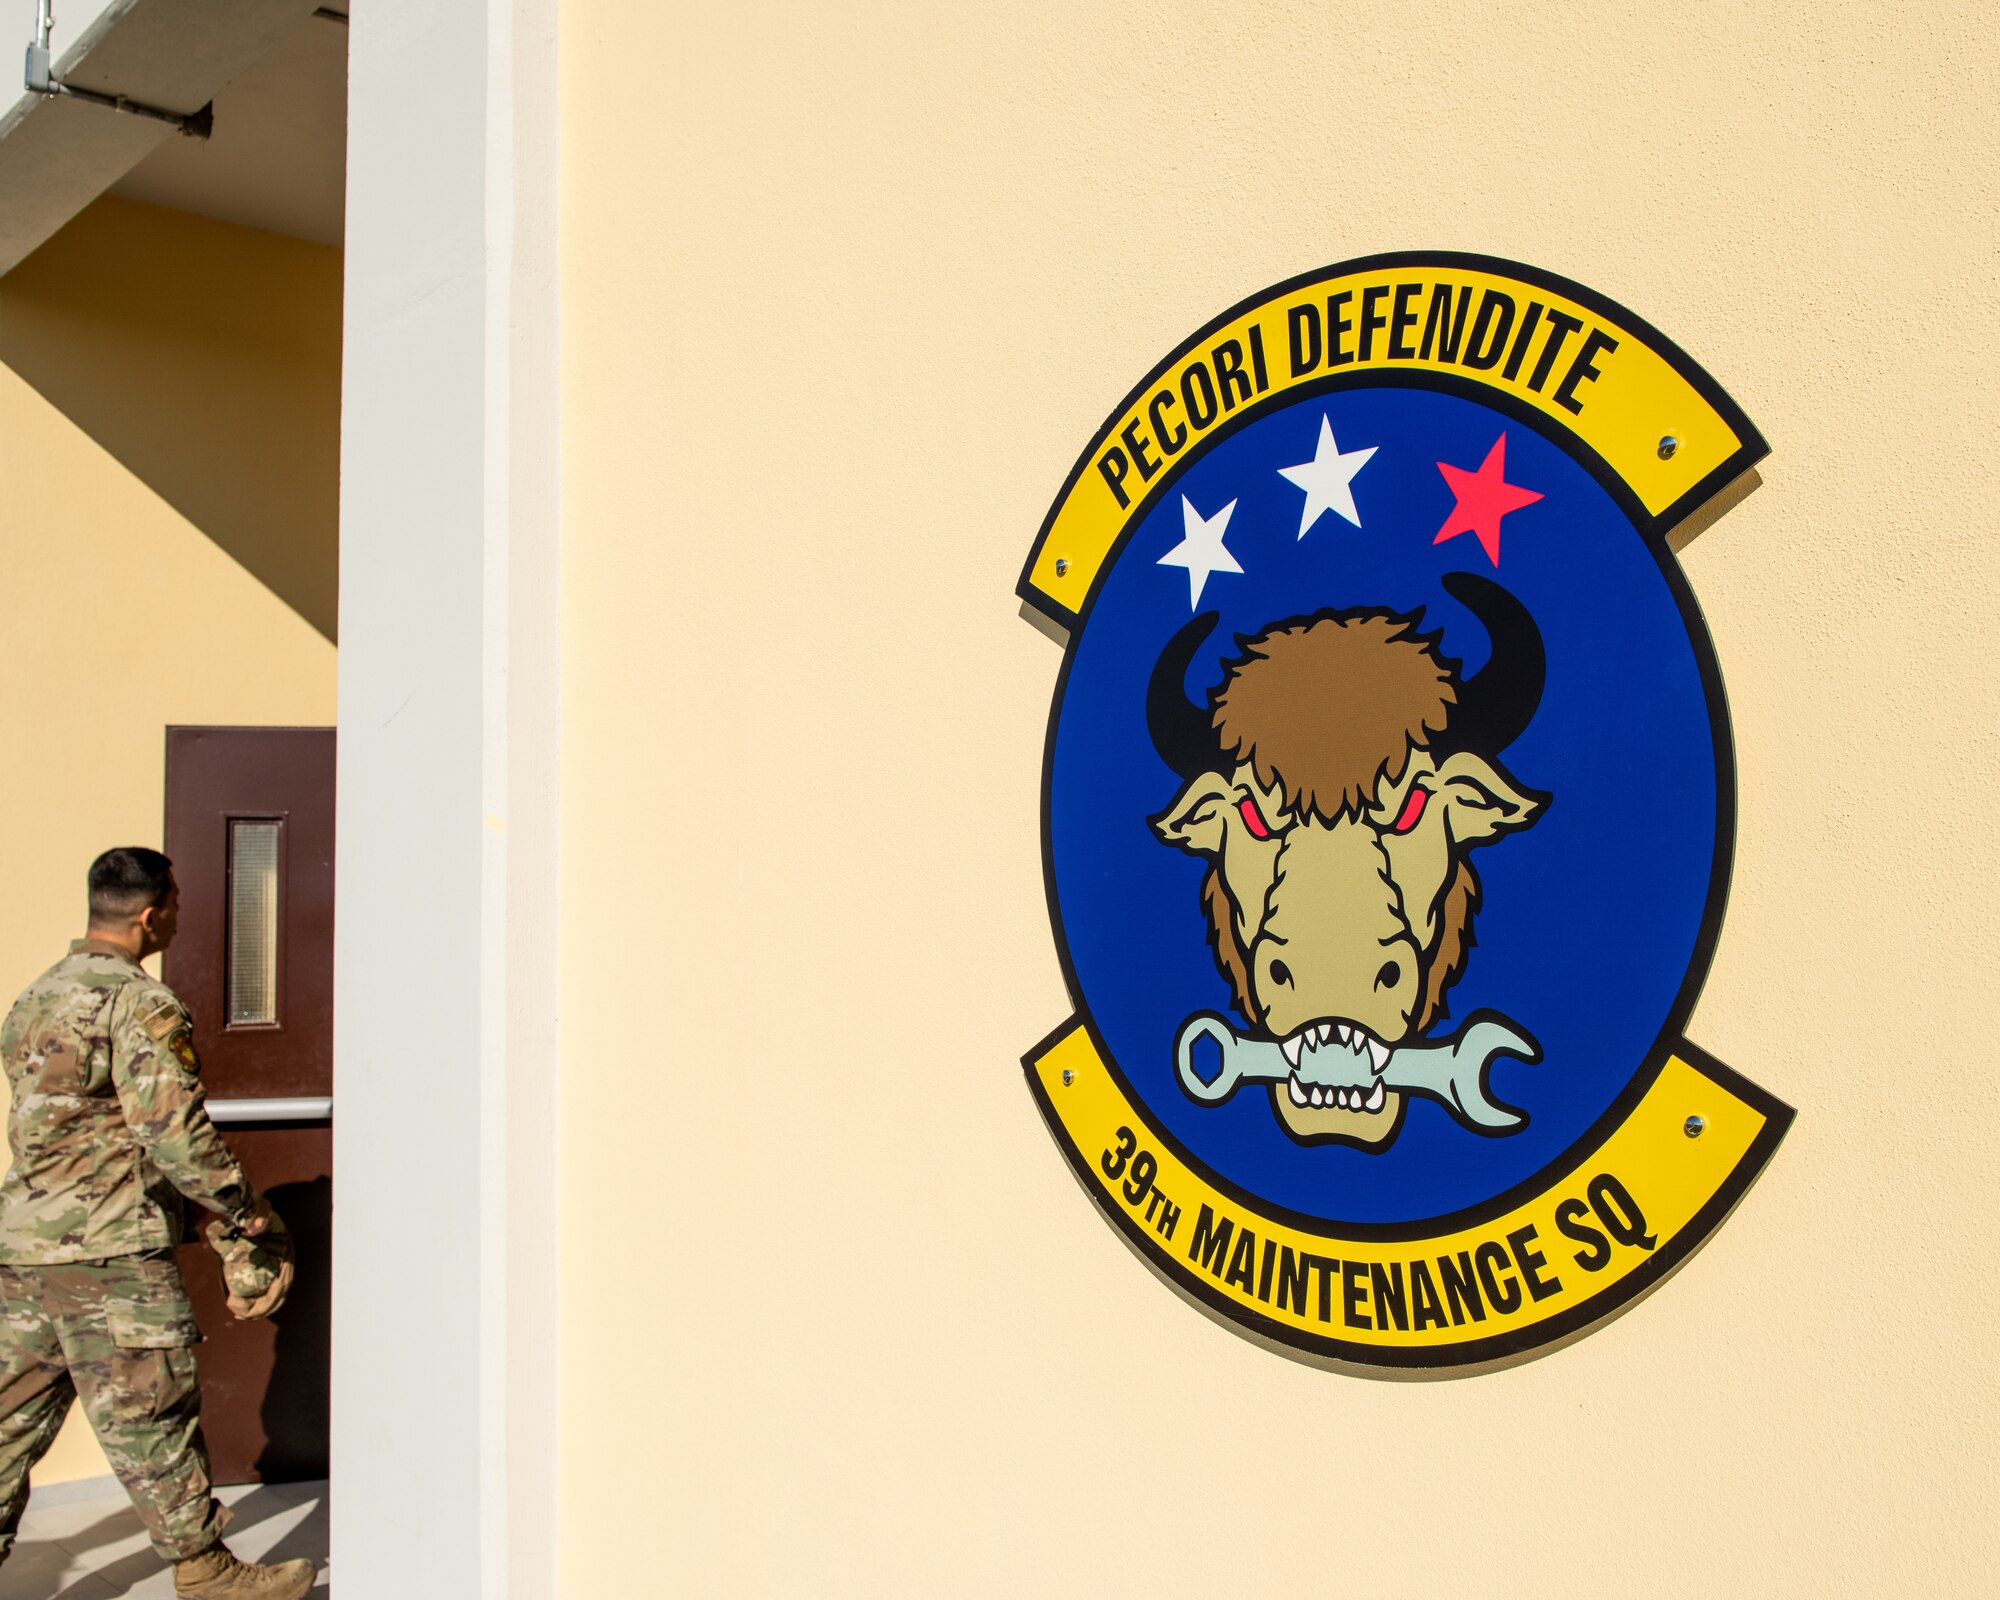 The 39th Maintenance Squadron emblem is displayed on the new munitions flight building at Incirlik Air Base, Türkiye, Dec. 19, 2022. Col. Calvin Powell, 39th Air Base Wing commander, and Maj. Jeffrey Allen, 39th Maintenance Squadron commander, presided over a ceremony to officially open the new 39th MXS munitions flight building, which was designed to provide a streamlined means of communication within the ammunitions flight and assist Airmen in building camaraderie and teamwork. The building also provides better protection for munitions assets controlled by the flight and consolidates six sections into a single building, increasing productivity for current and future Airmen. (U.S. Air Force photo by Senior Airman David D. McLoney)